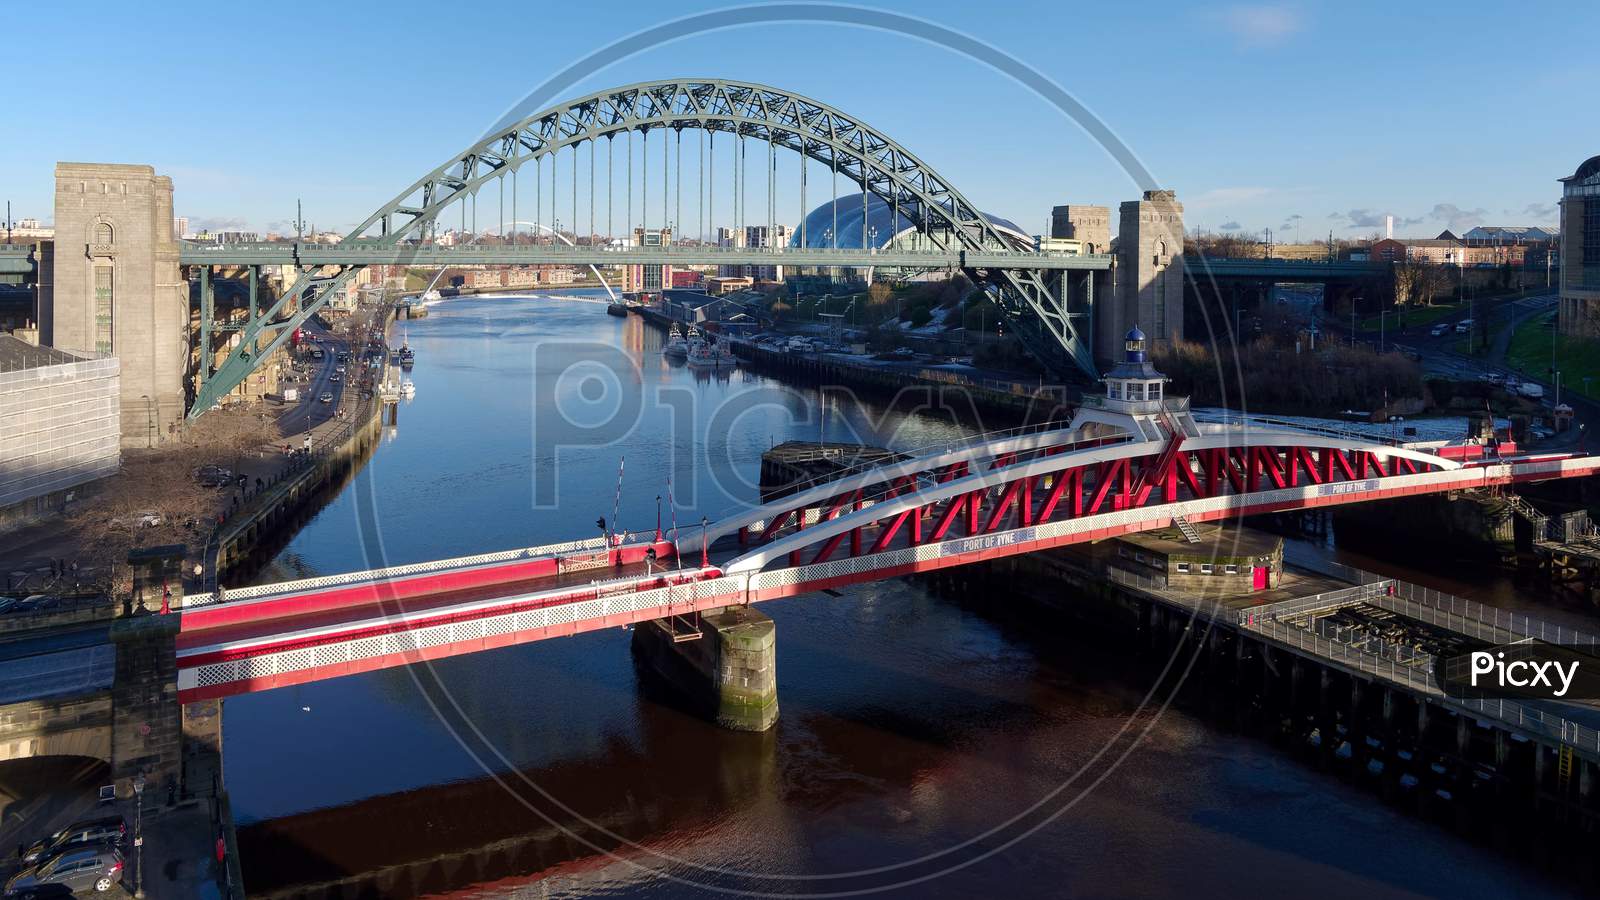 Newcastle Upon Tyne, Tyne And Wear/Uk - January 20 : View Of The Tyne  And Swing Bridges In Newcastle Upon Tyne, Tyne And Wear On January 20, 2018